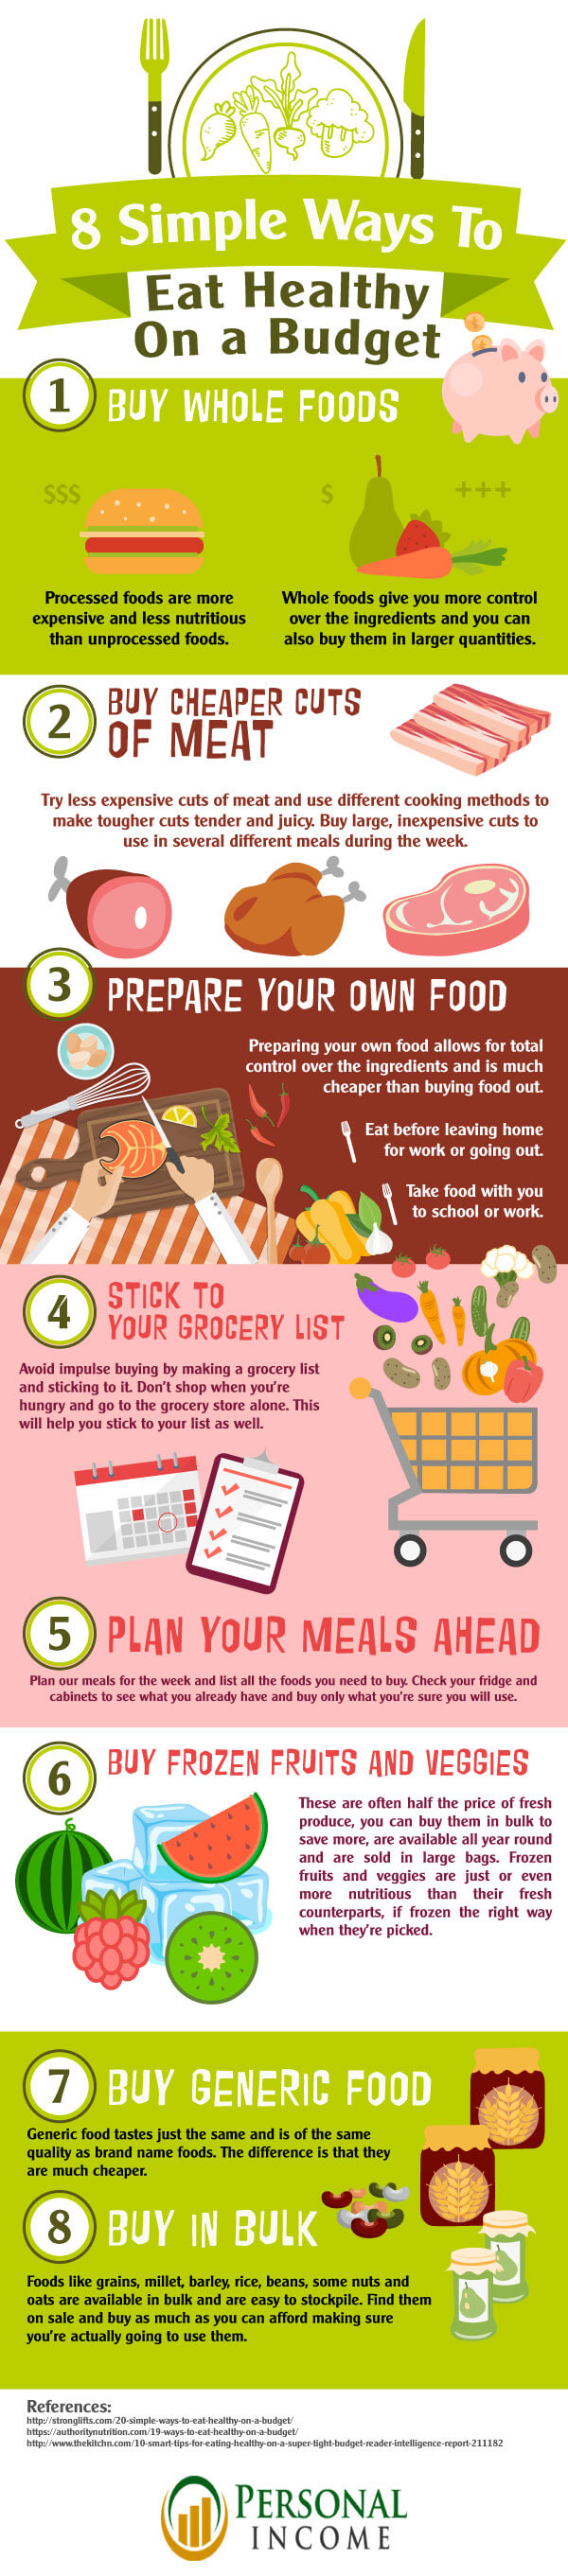 8 Simple Ways to Eat Healthy on a Budget